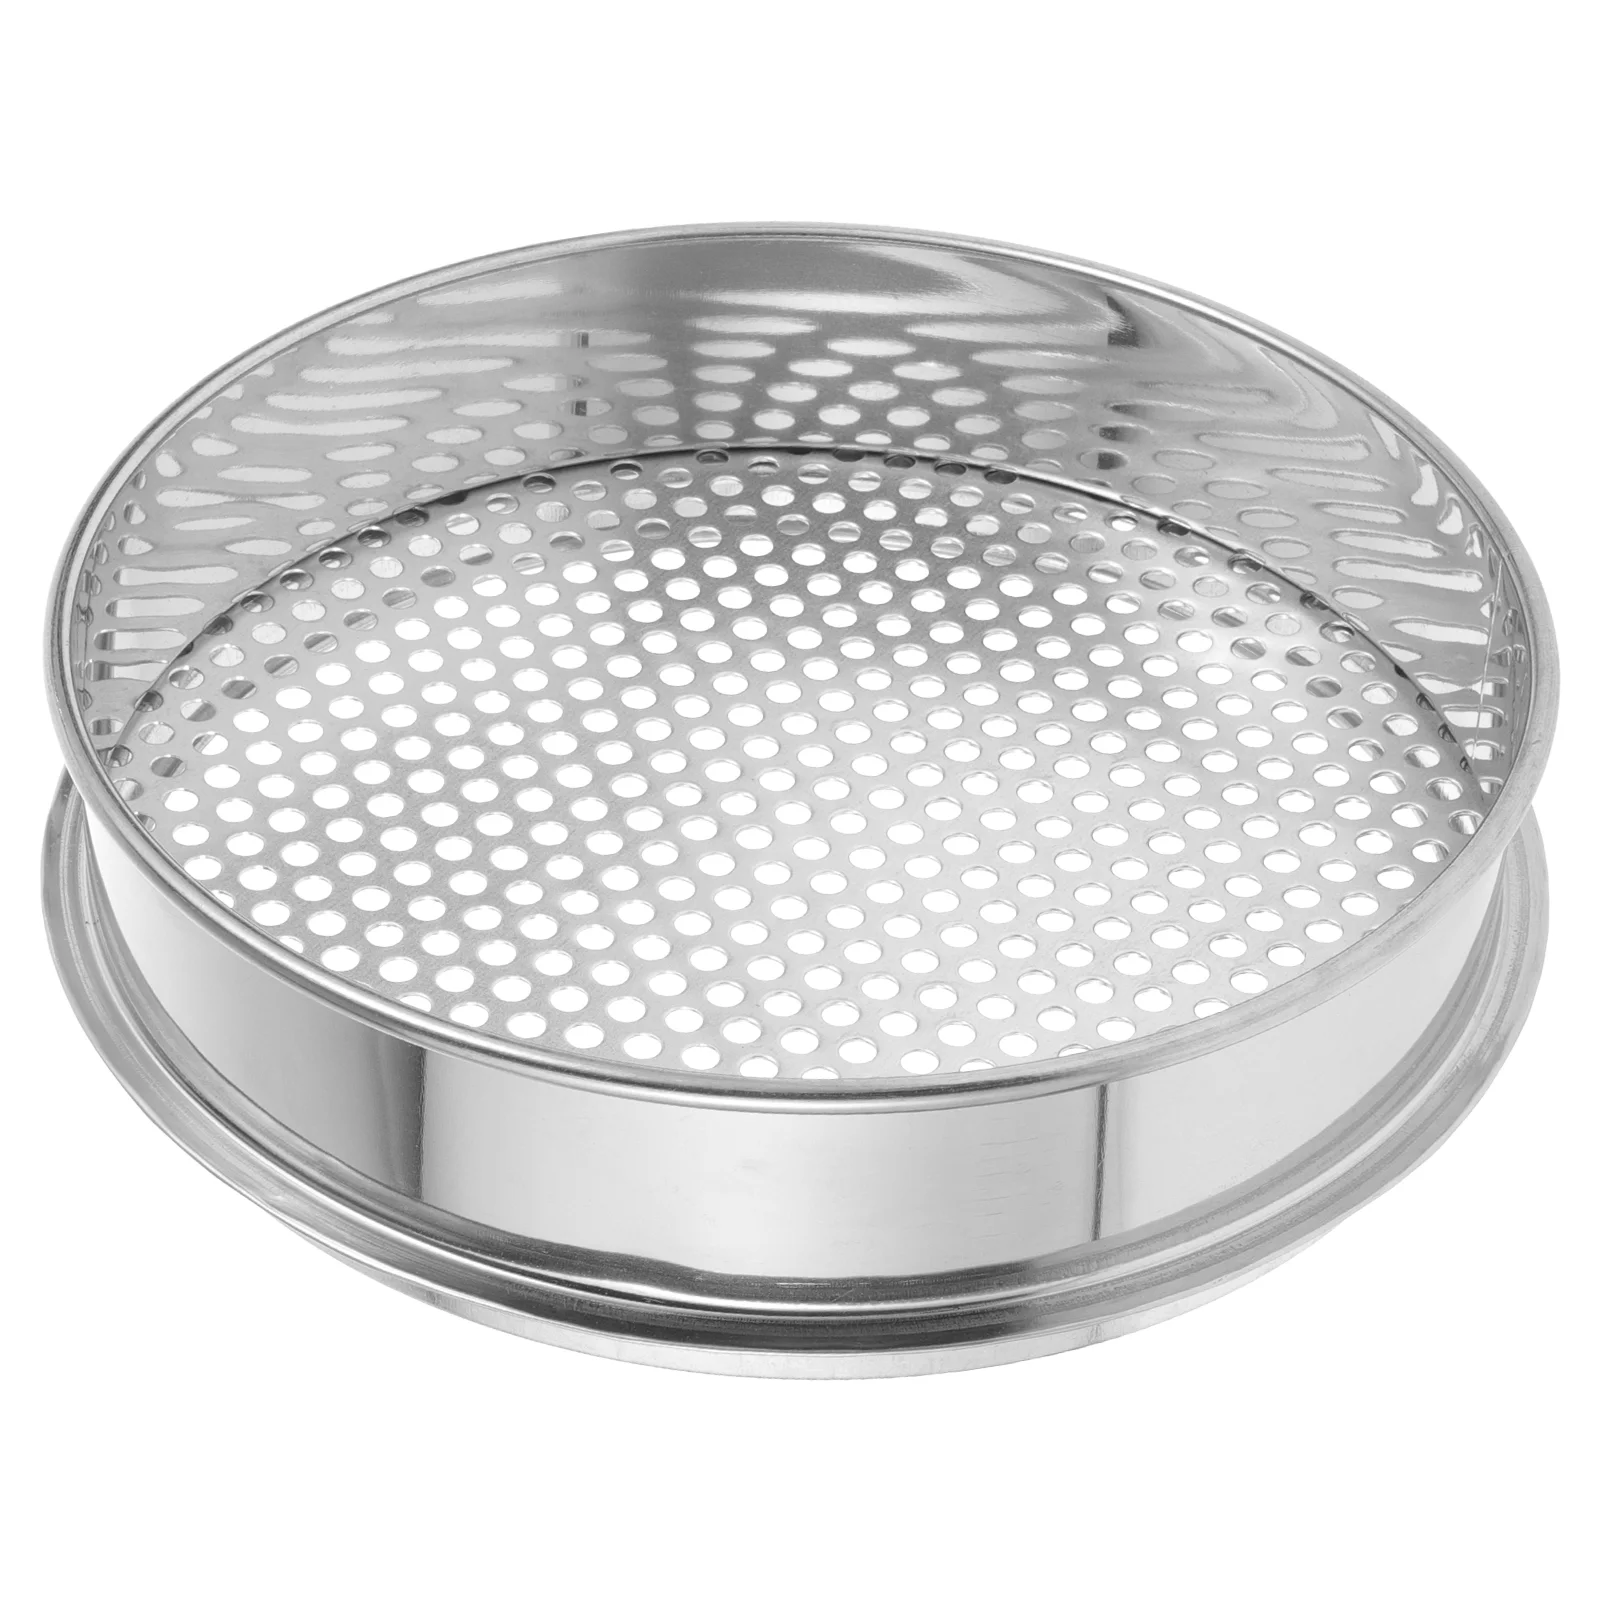 

Soil Screen Pearl Sifter Sieve Fine Mesh Stainless Steel Home Grading Food Beans Coffee Round Hole Kitchen Supply